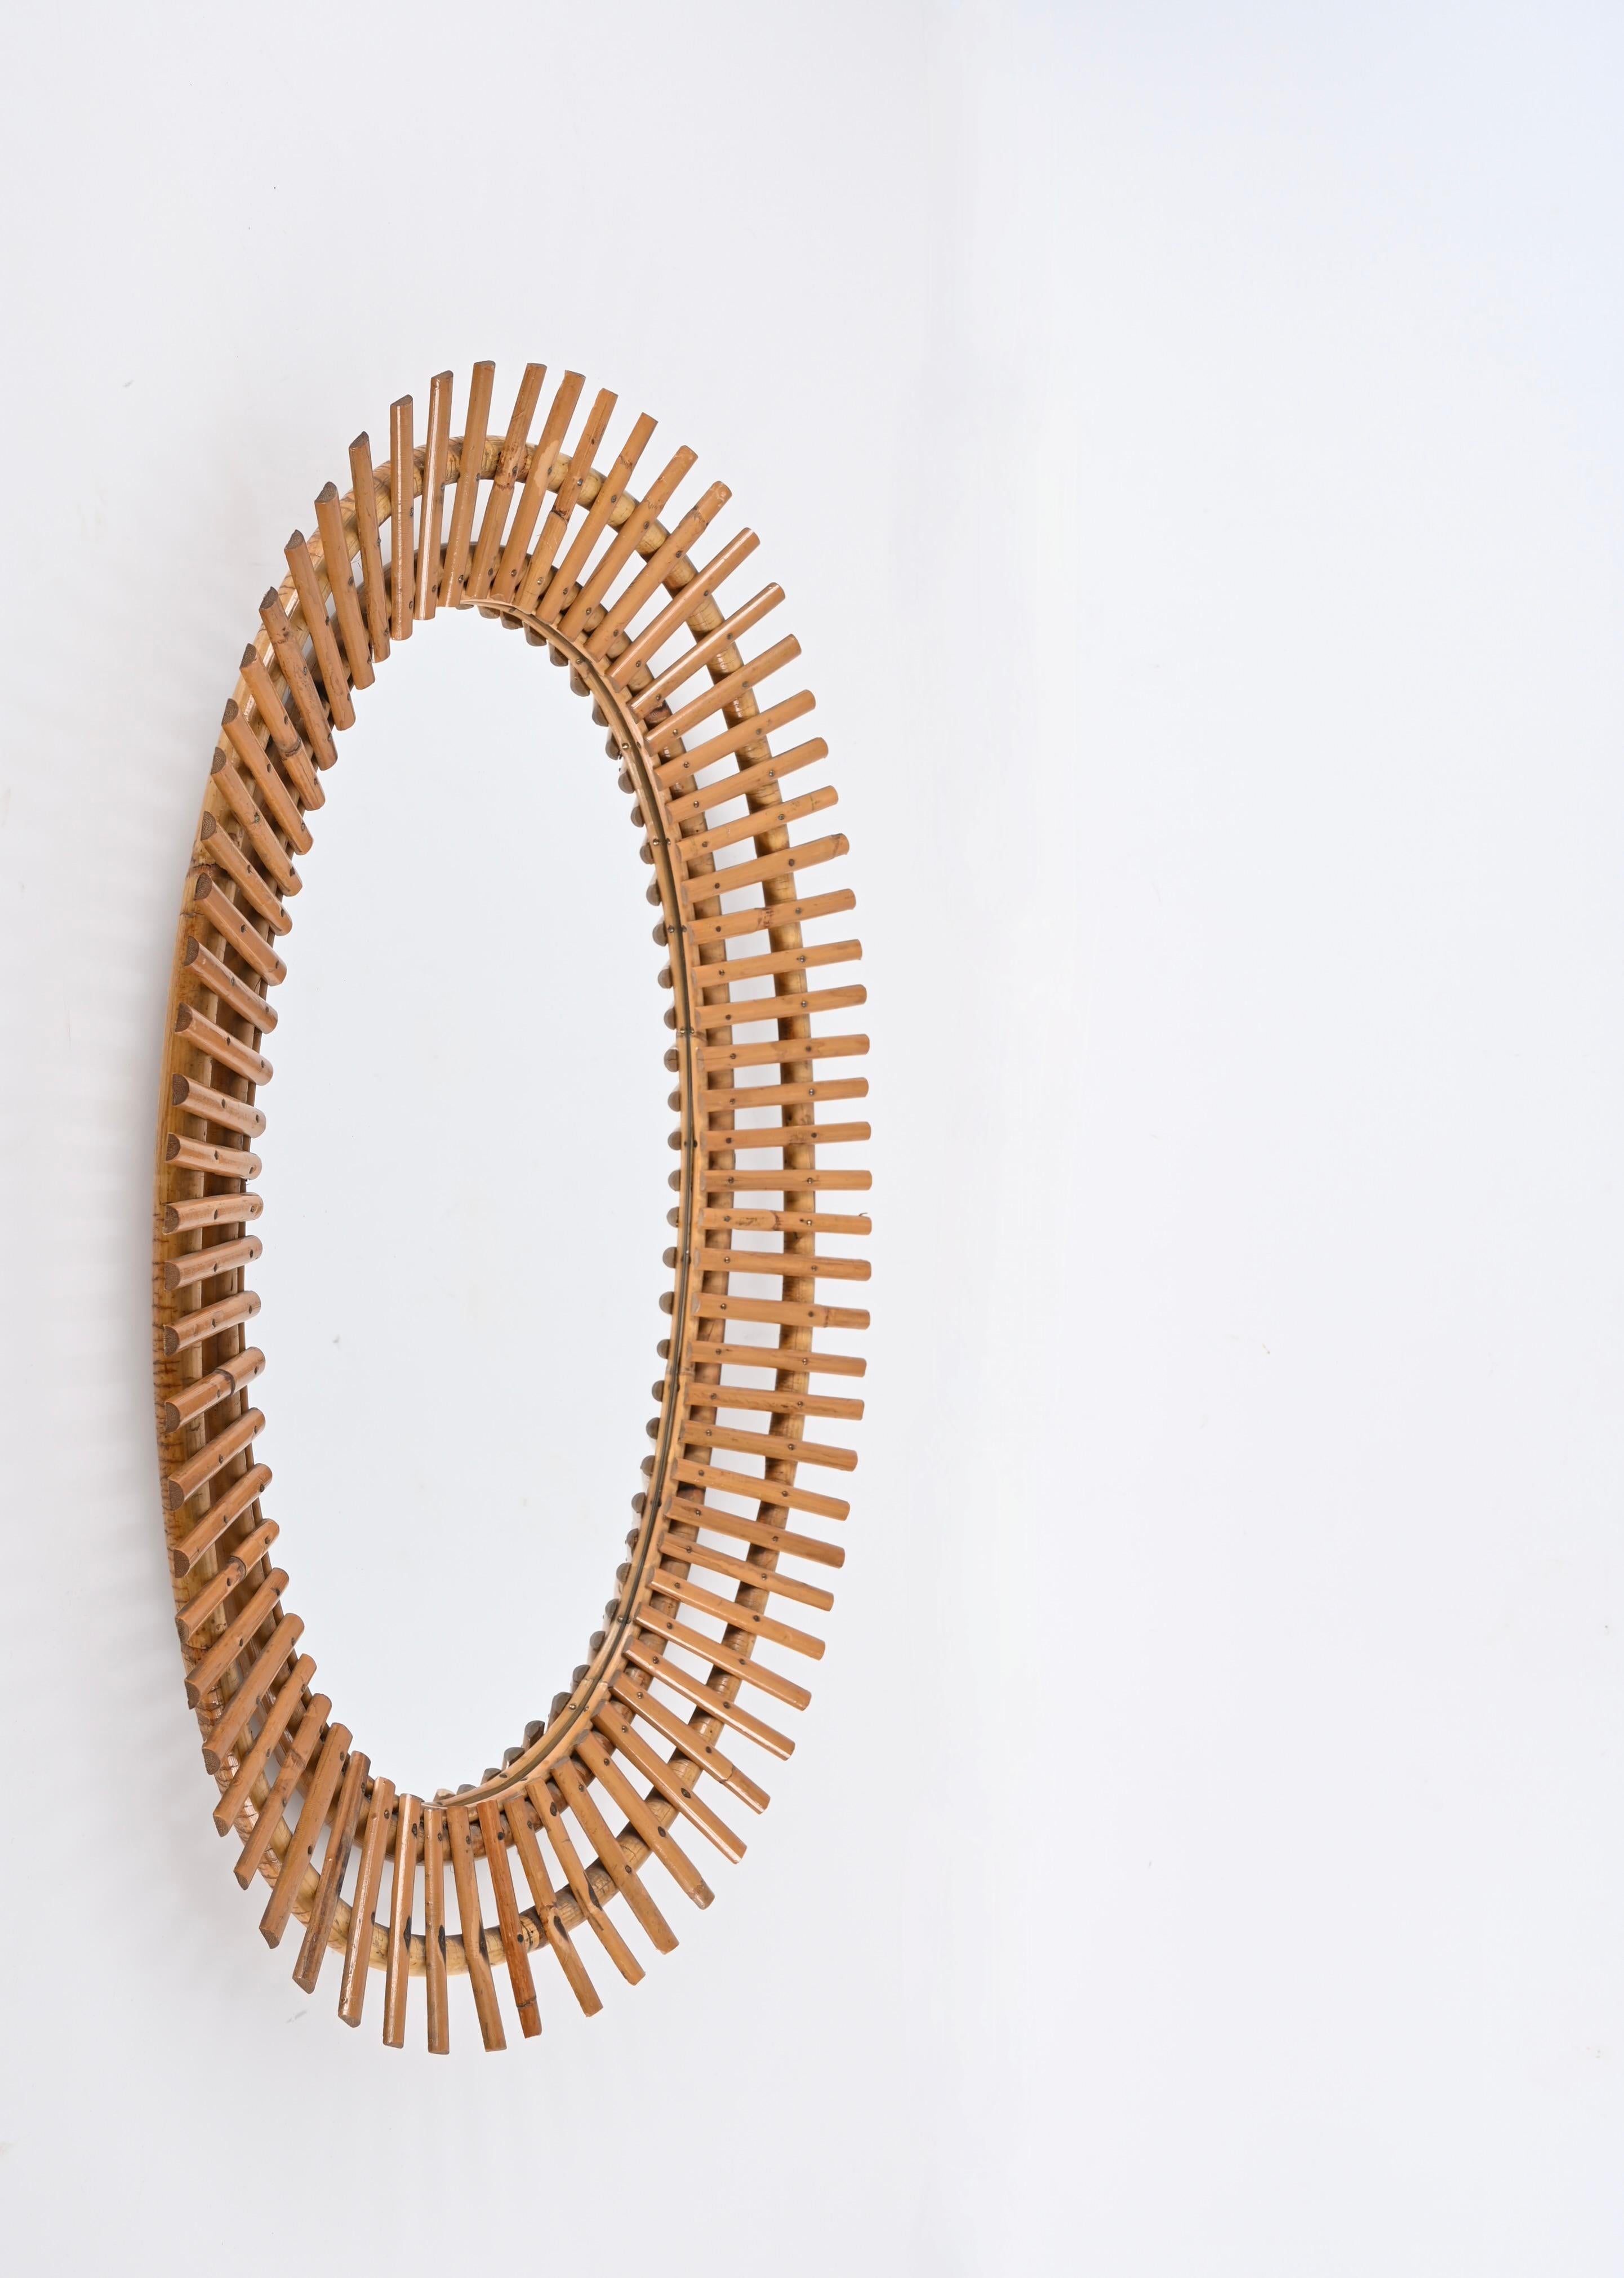 Italian Midcentury French Riviera Oval Wall Mirror with Bamboo and Rattan Frame, 1960s